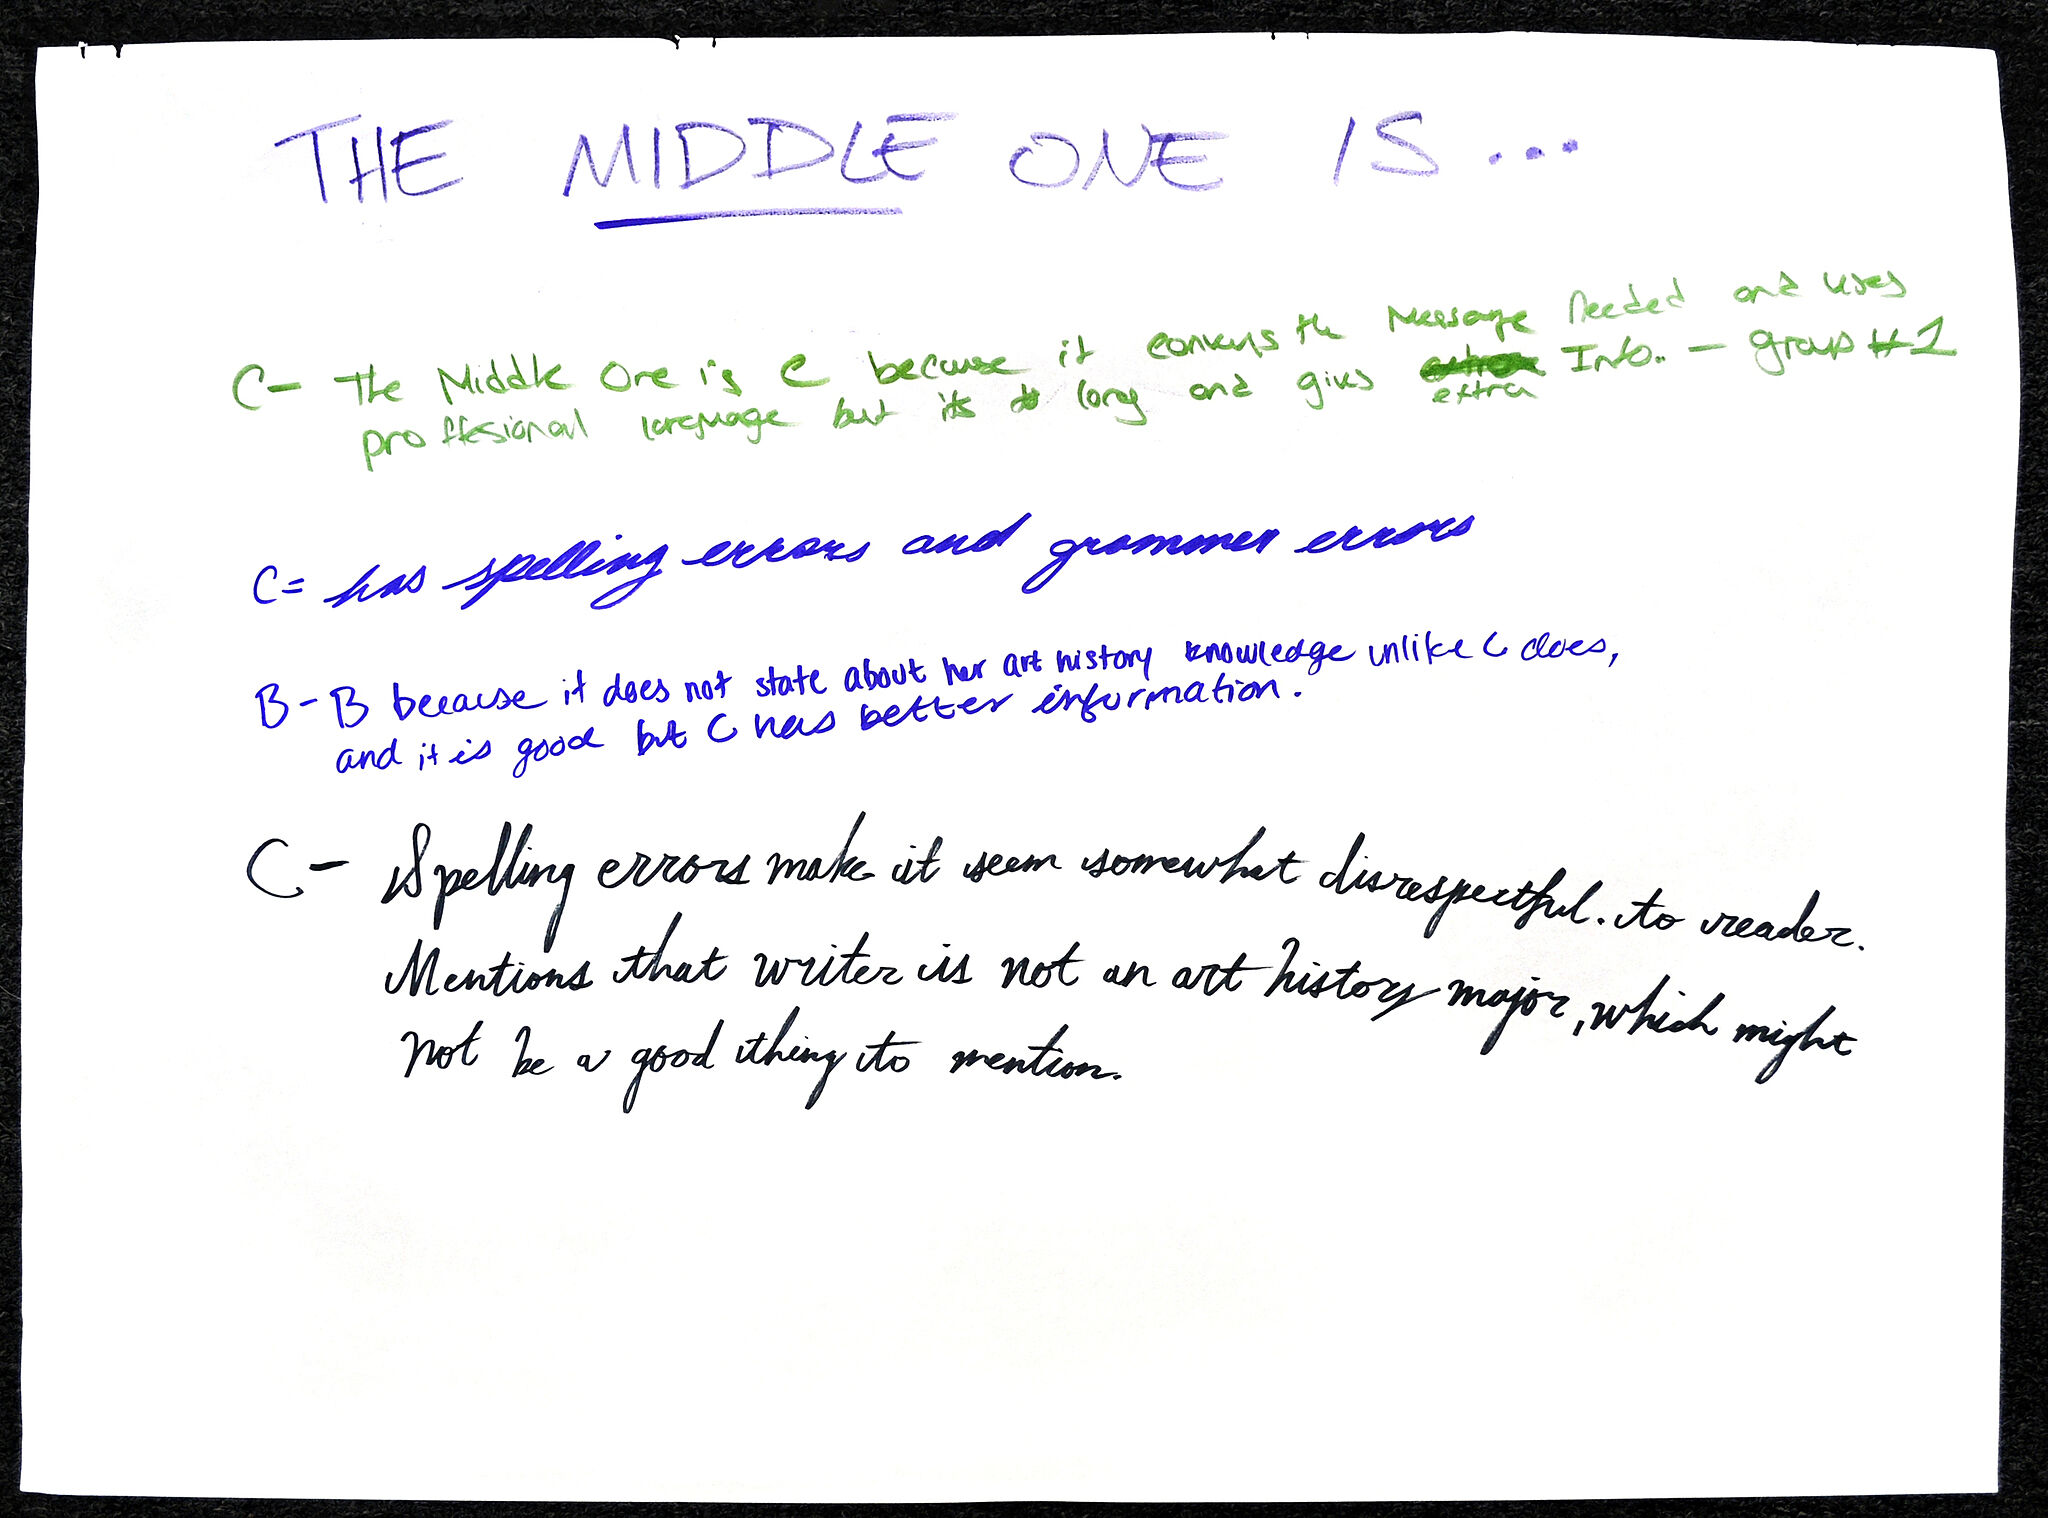 Writing on a whiteboard about middle one